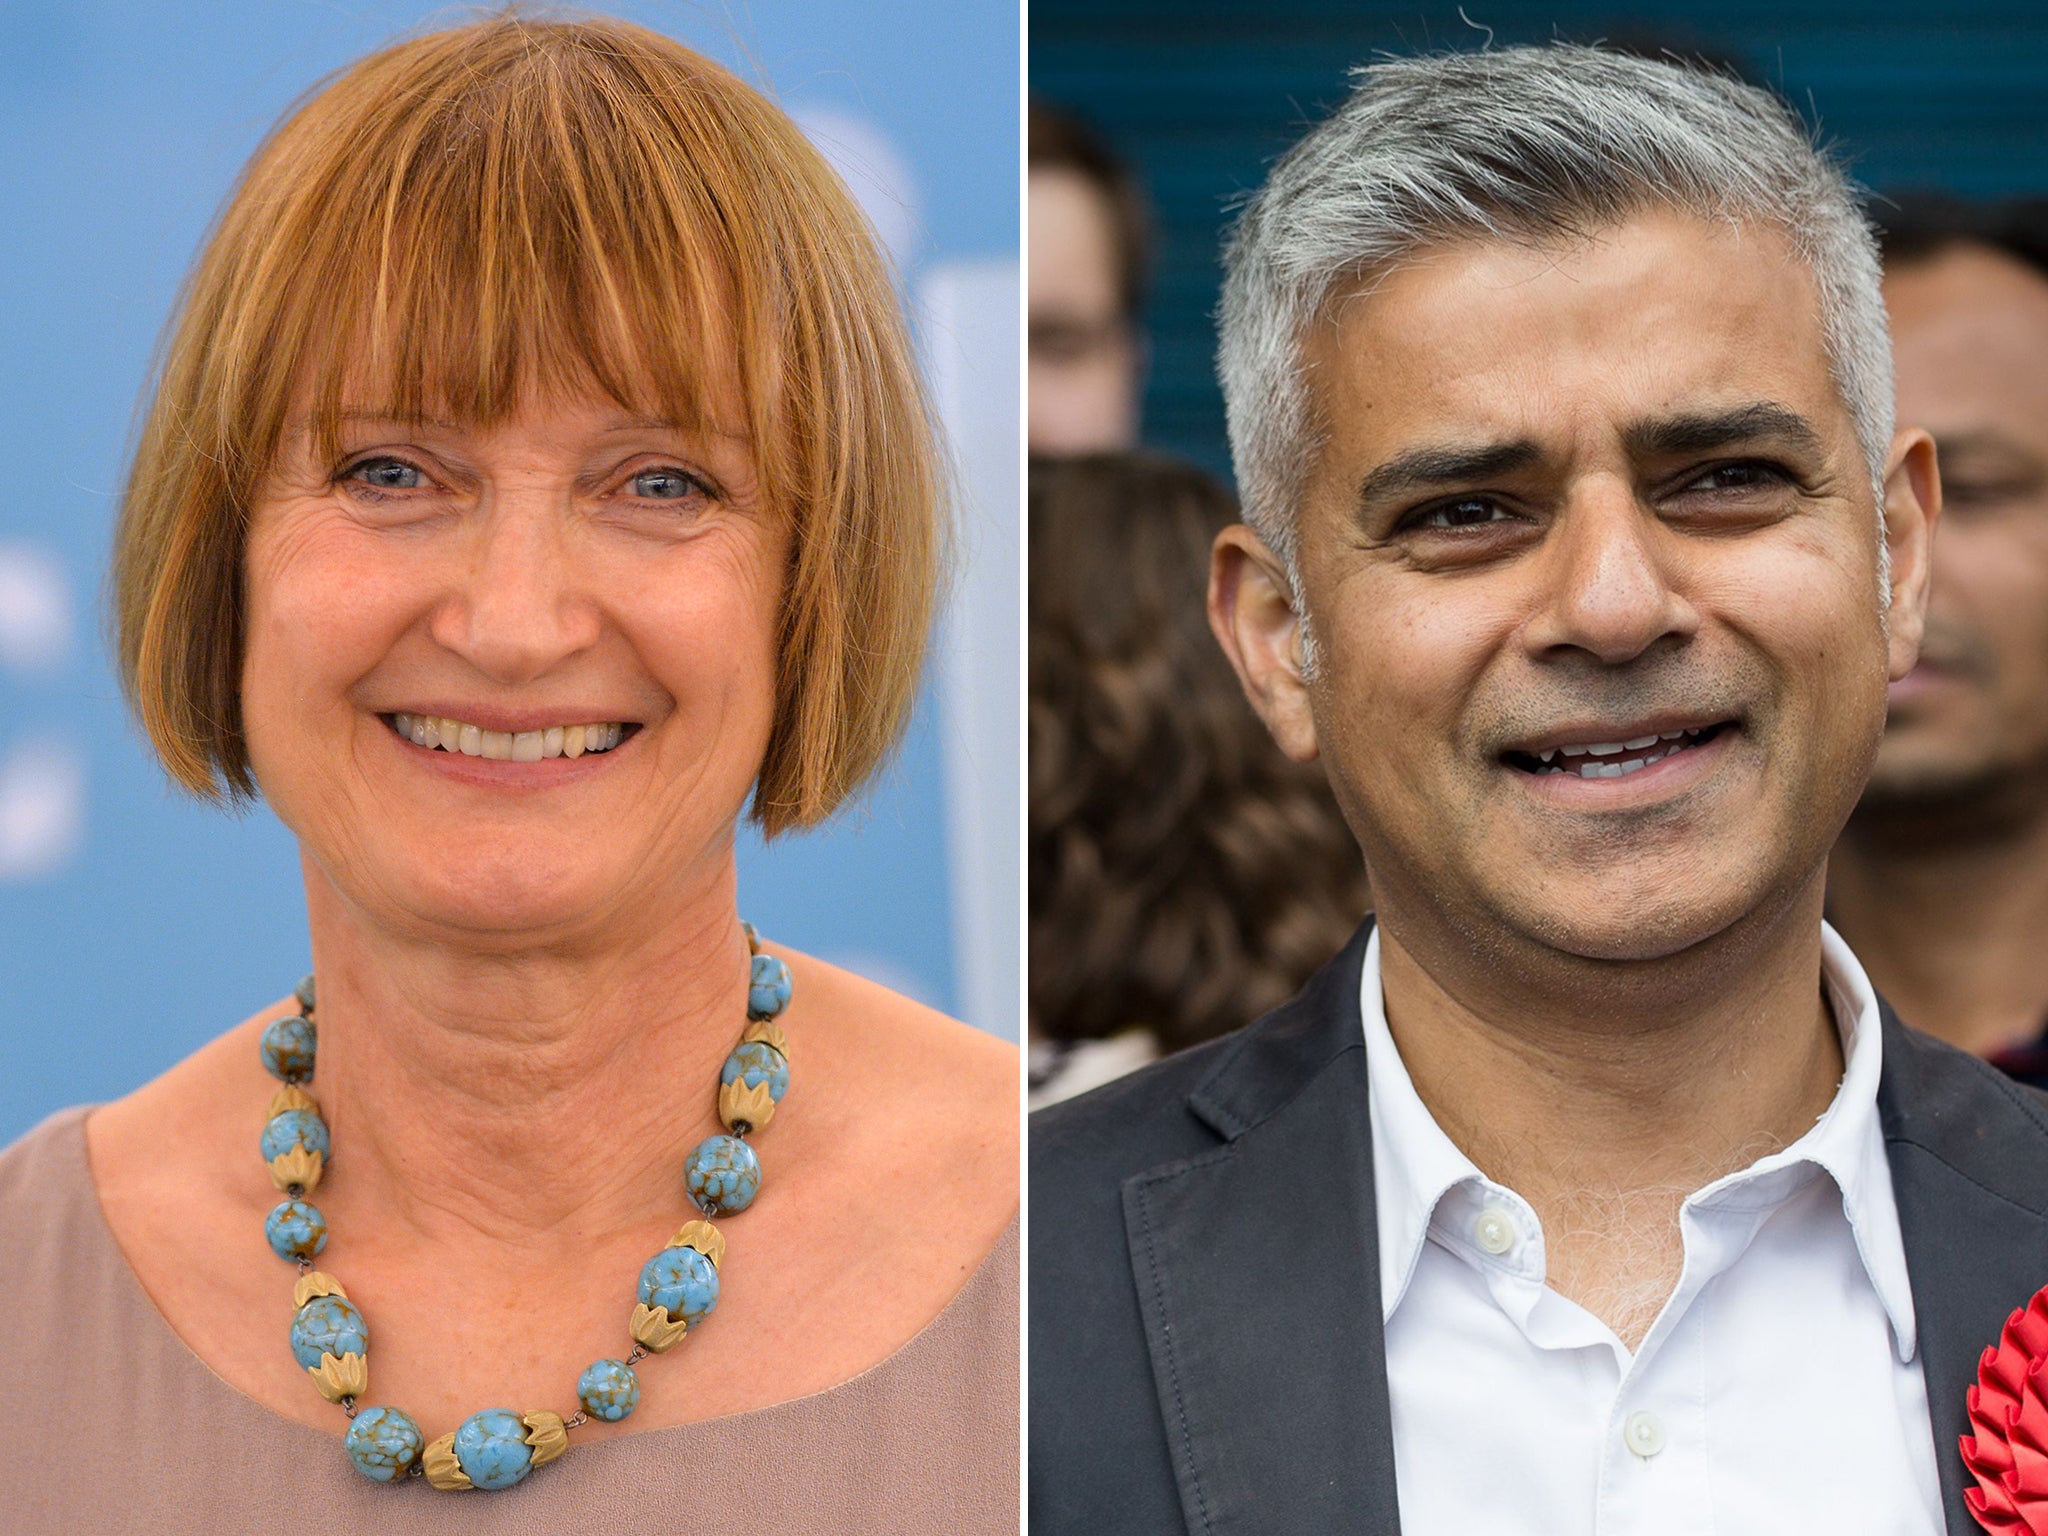 A close-run result is expected between Dame Tessa Jowell and Sadiq Khan in the contest to find Labour's candidate for Mayor of London